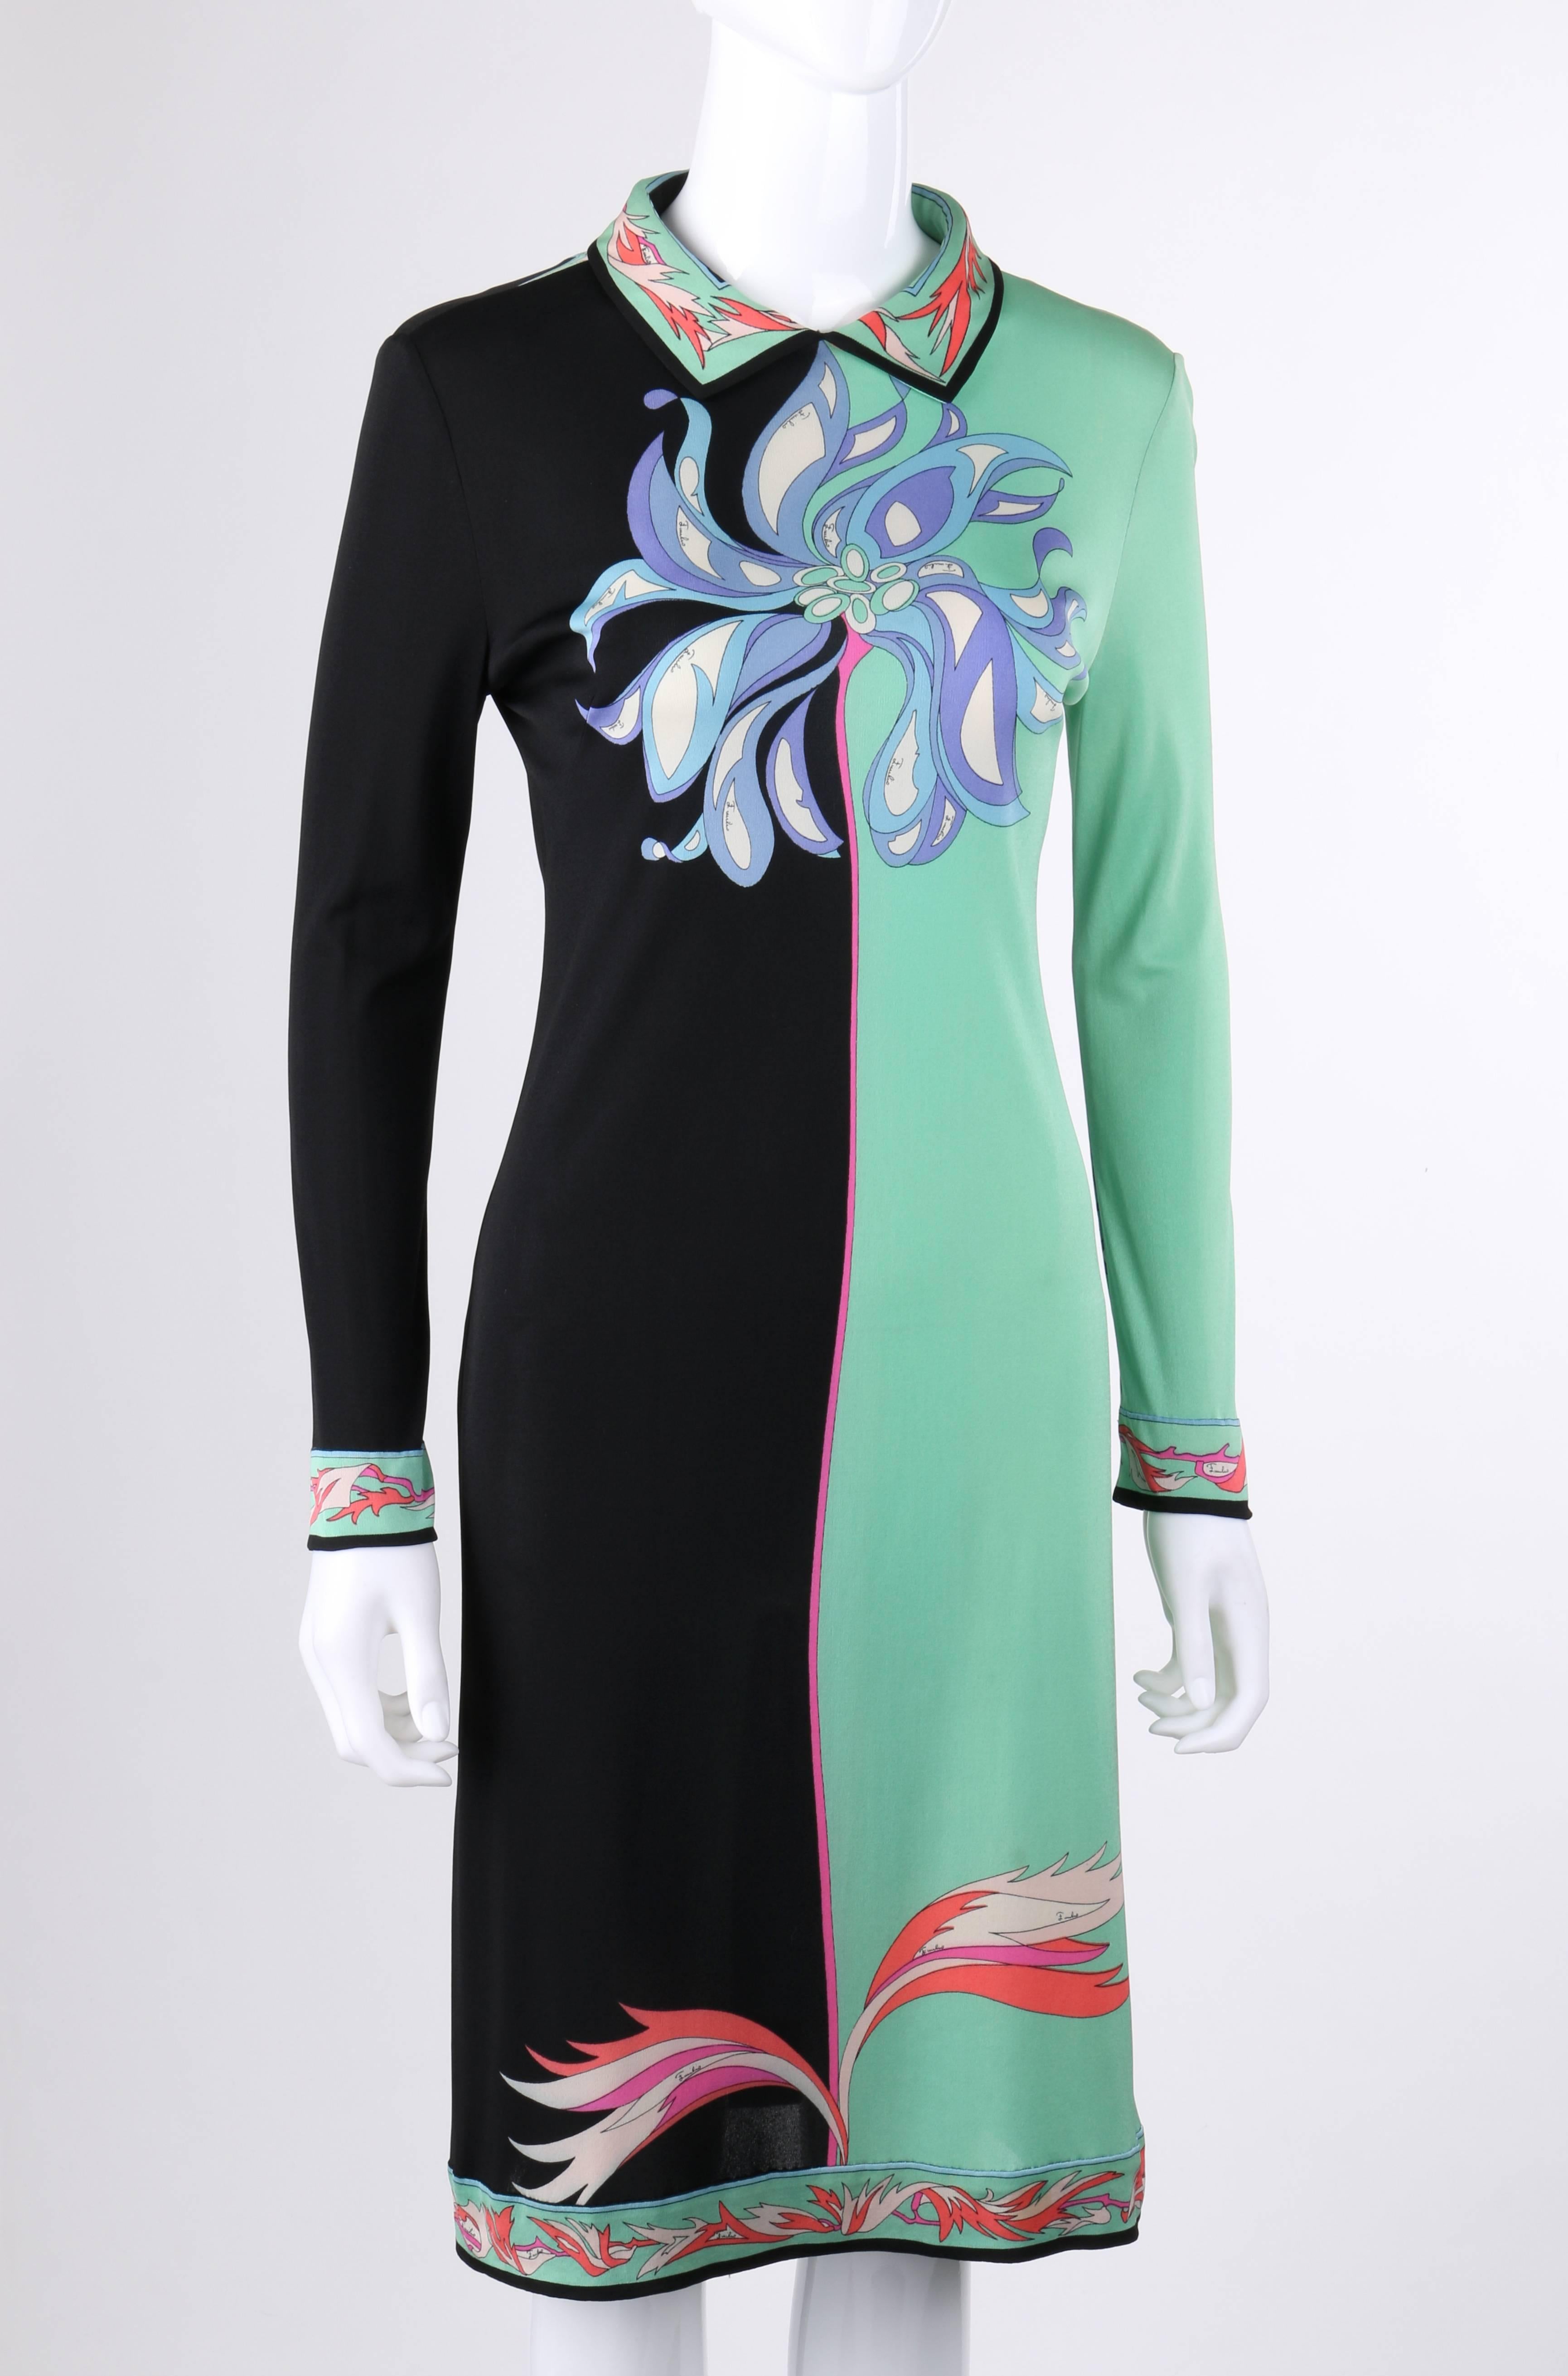 Vintage Emilio Pucci c.1970's mint green & black color-block silk jersey dress. Large floral print in shades of blue, green, and white at center front and sleeves. Botanical boarder print in shades of pink at hemline, sleeve cuffs, collar, and back.